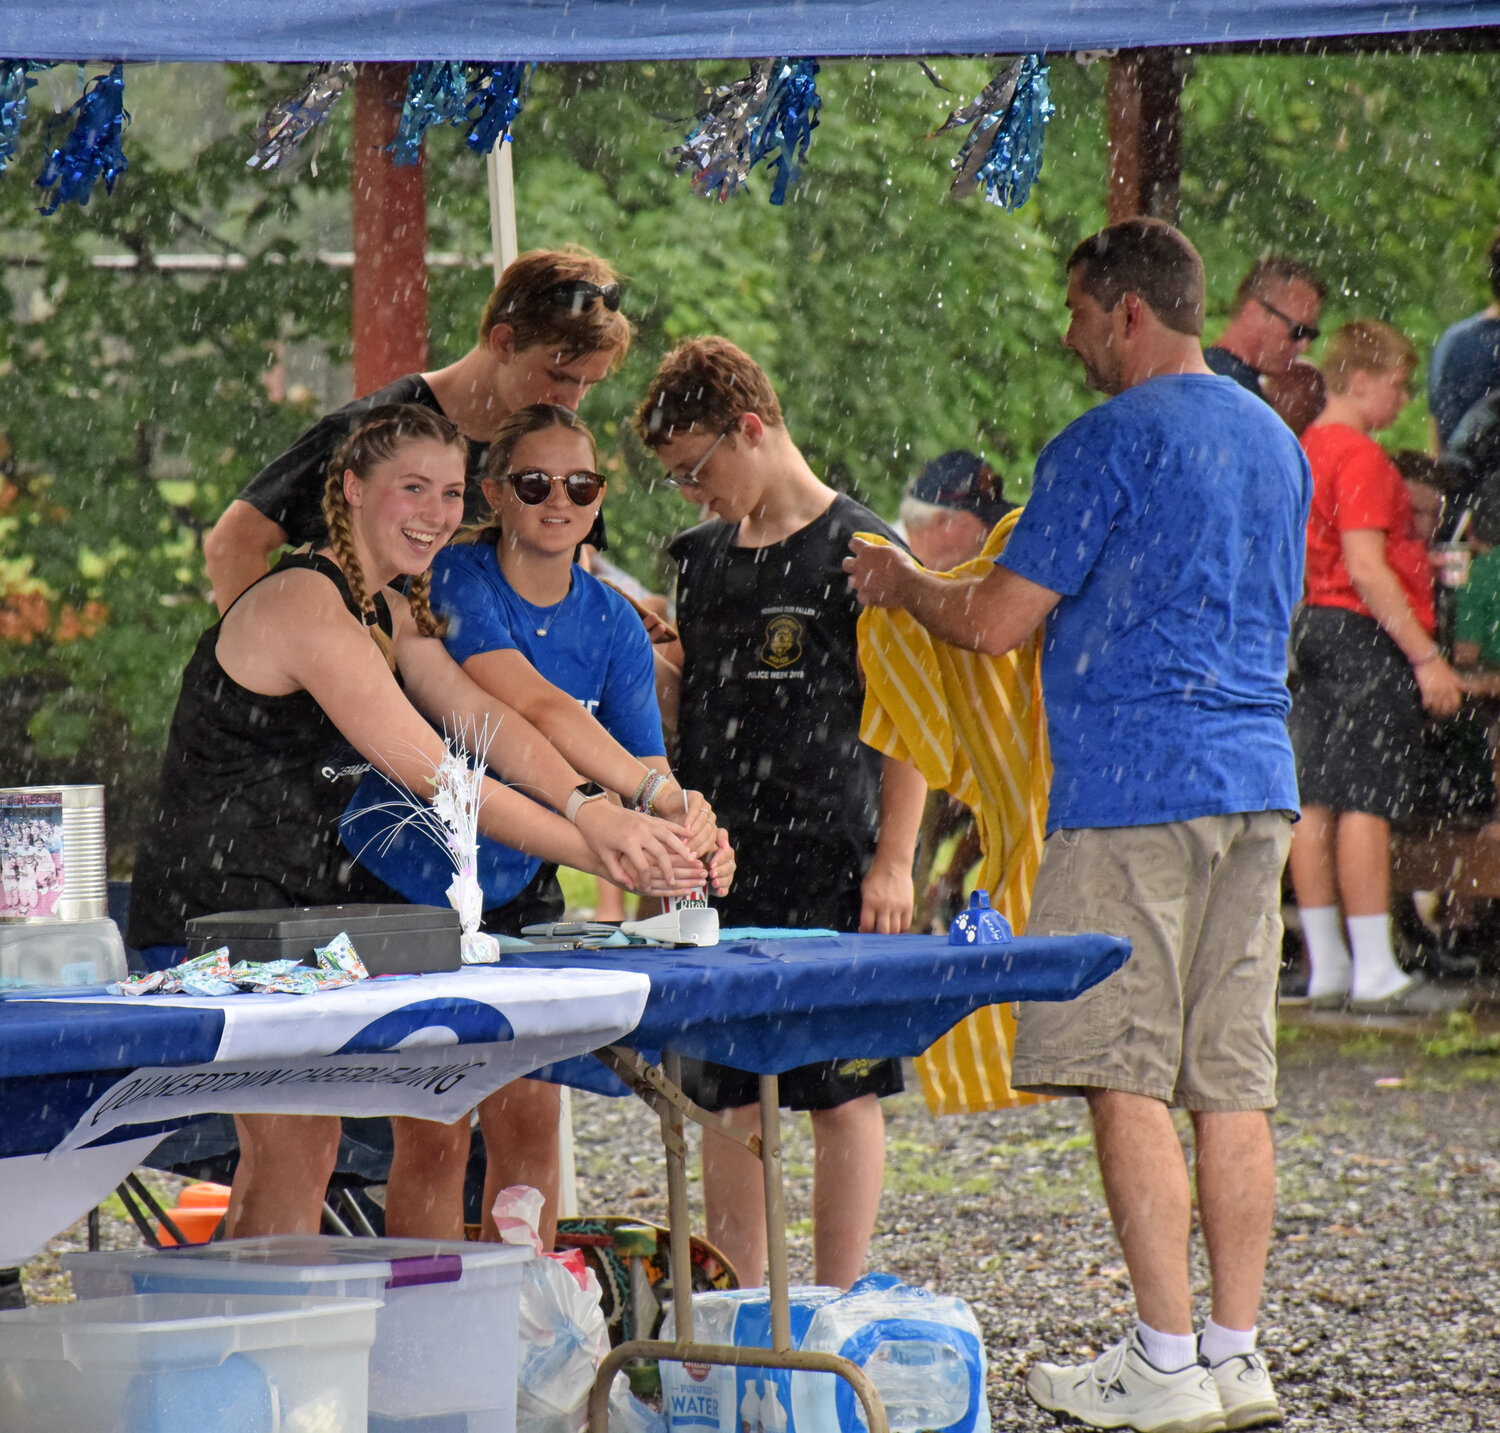 Quakertown Cheerleaders Alyssa Fonda and Alexis Austin protect their Rita’s Water Ice during the heavy downpours at Quakertown Community Day Tuesday.